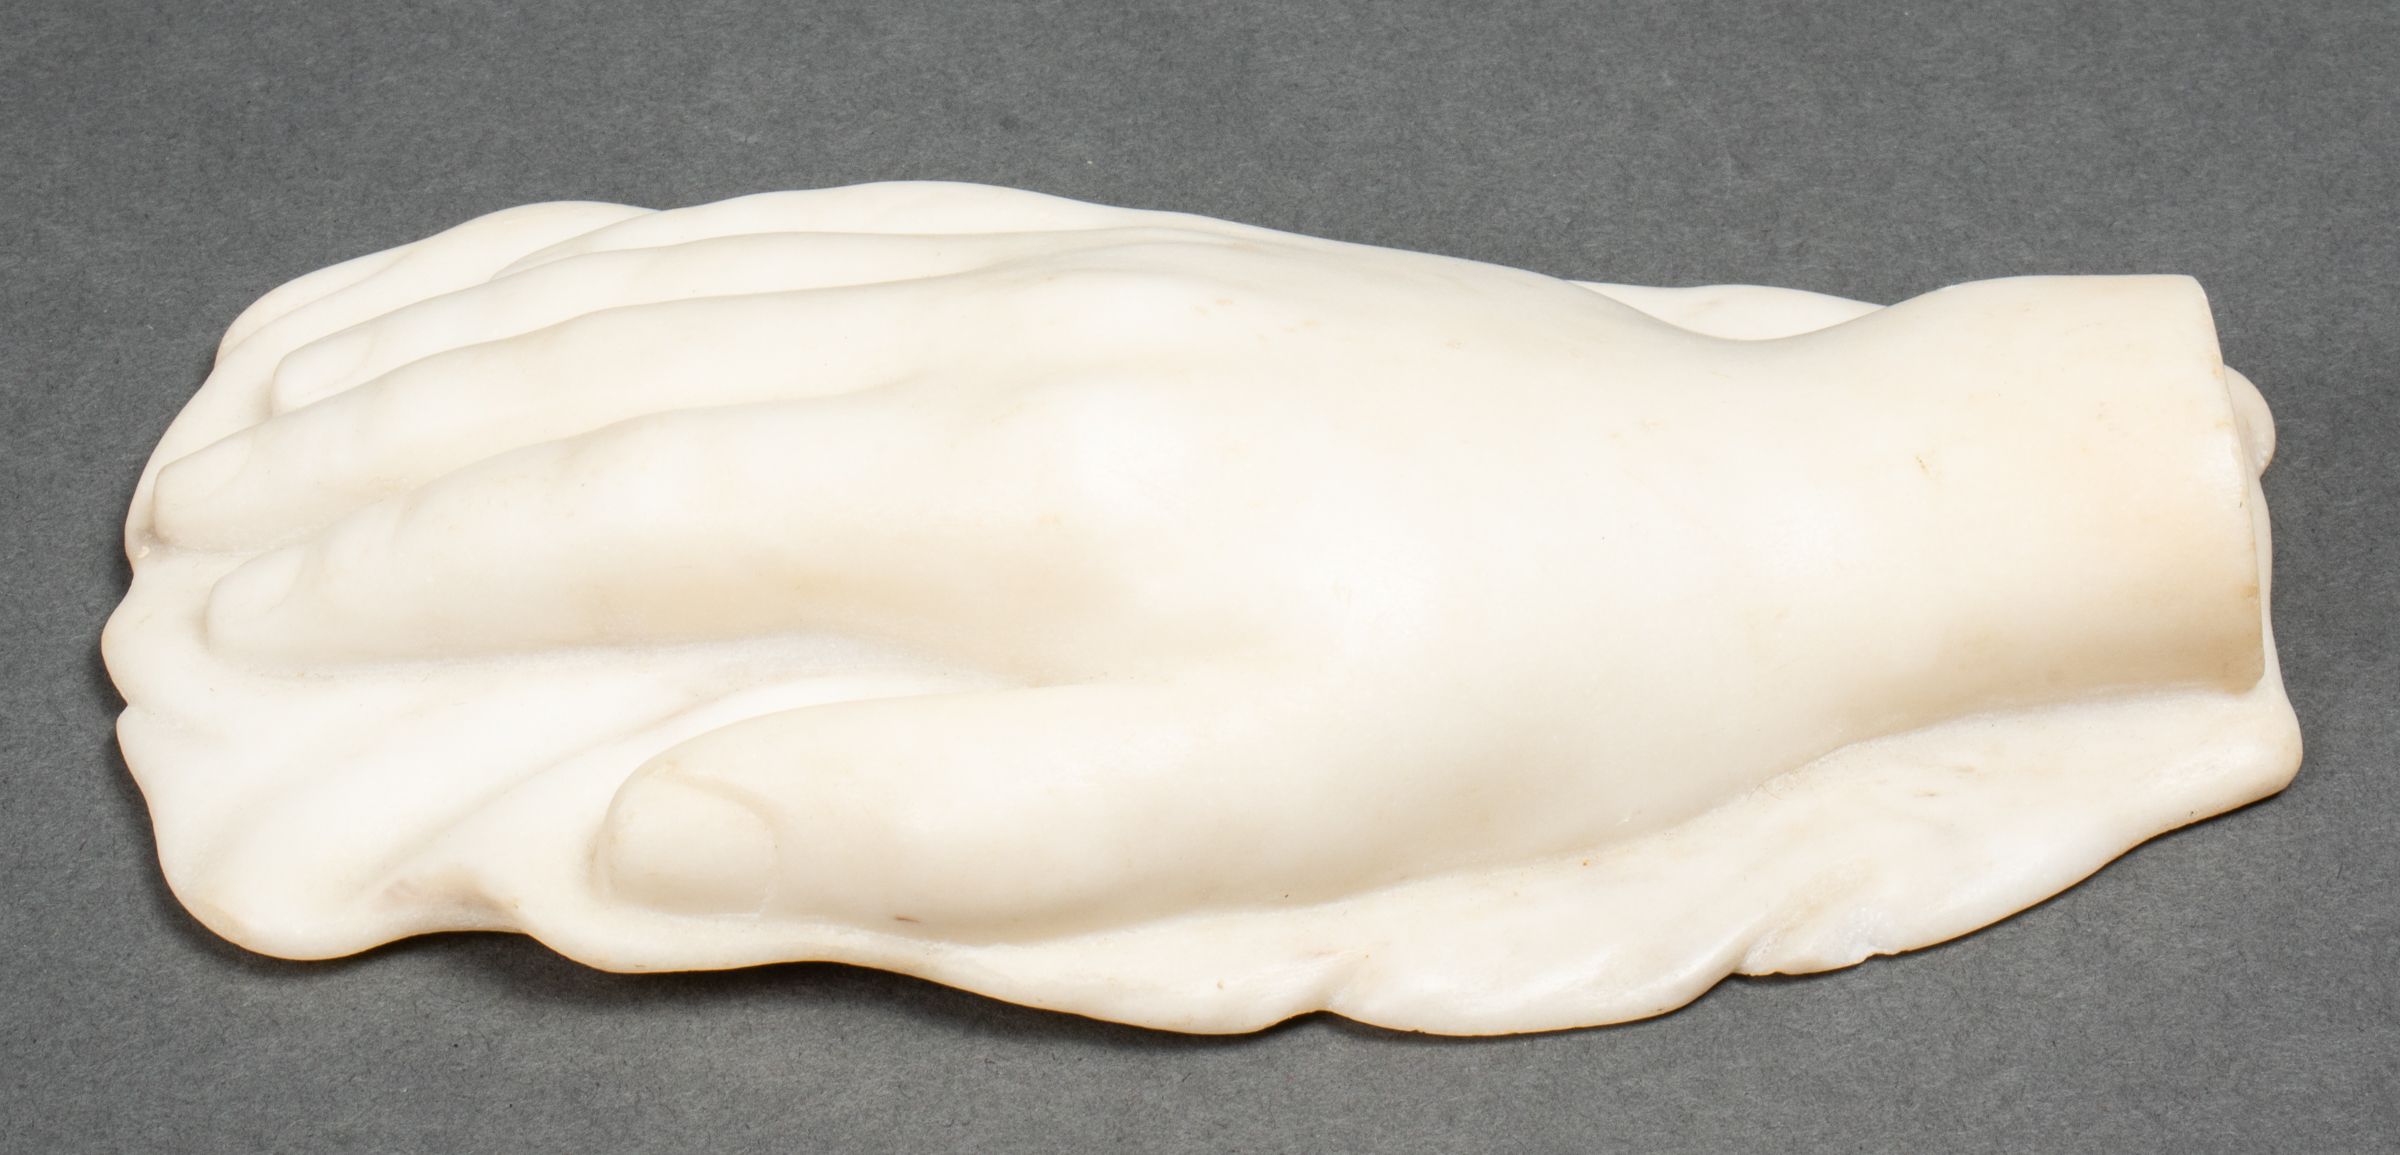 CONTINENTAL CARVED MARBLE SCULPTURE 3c2f21